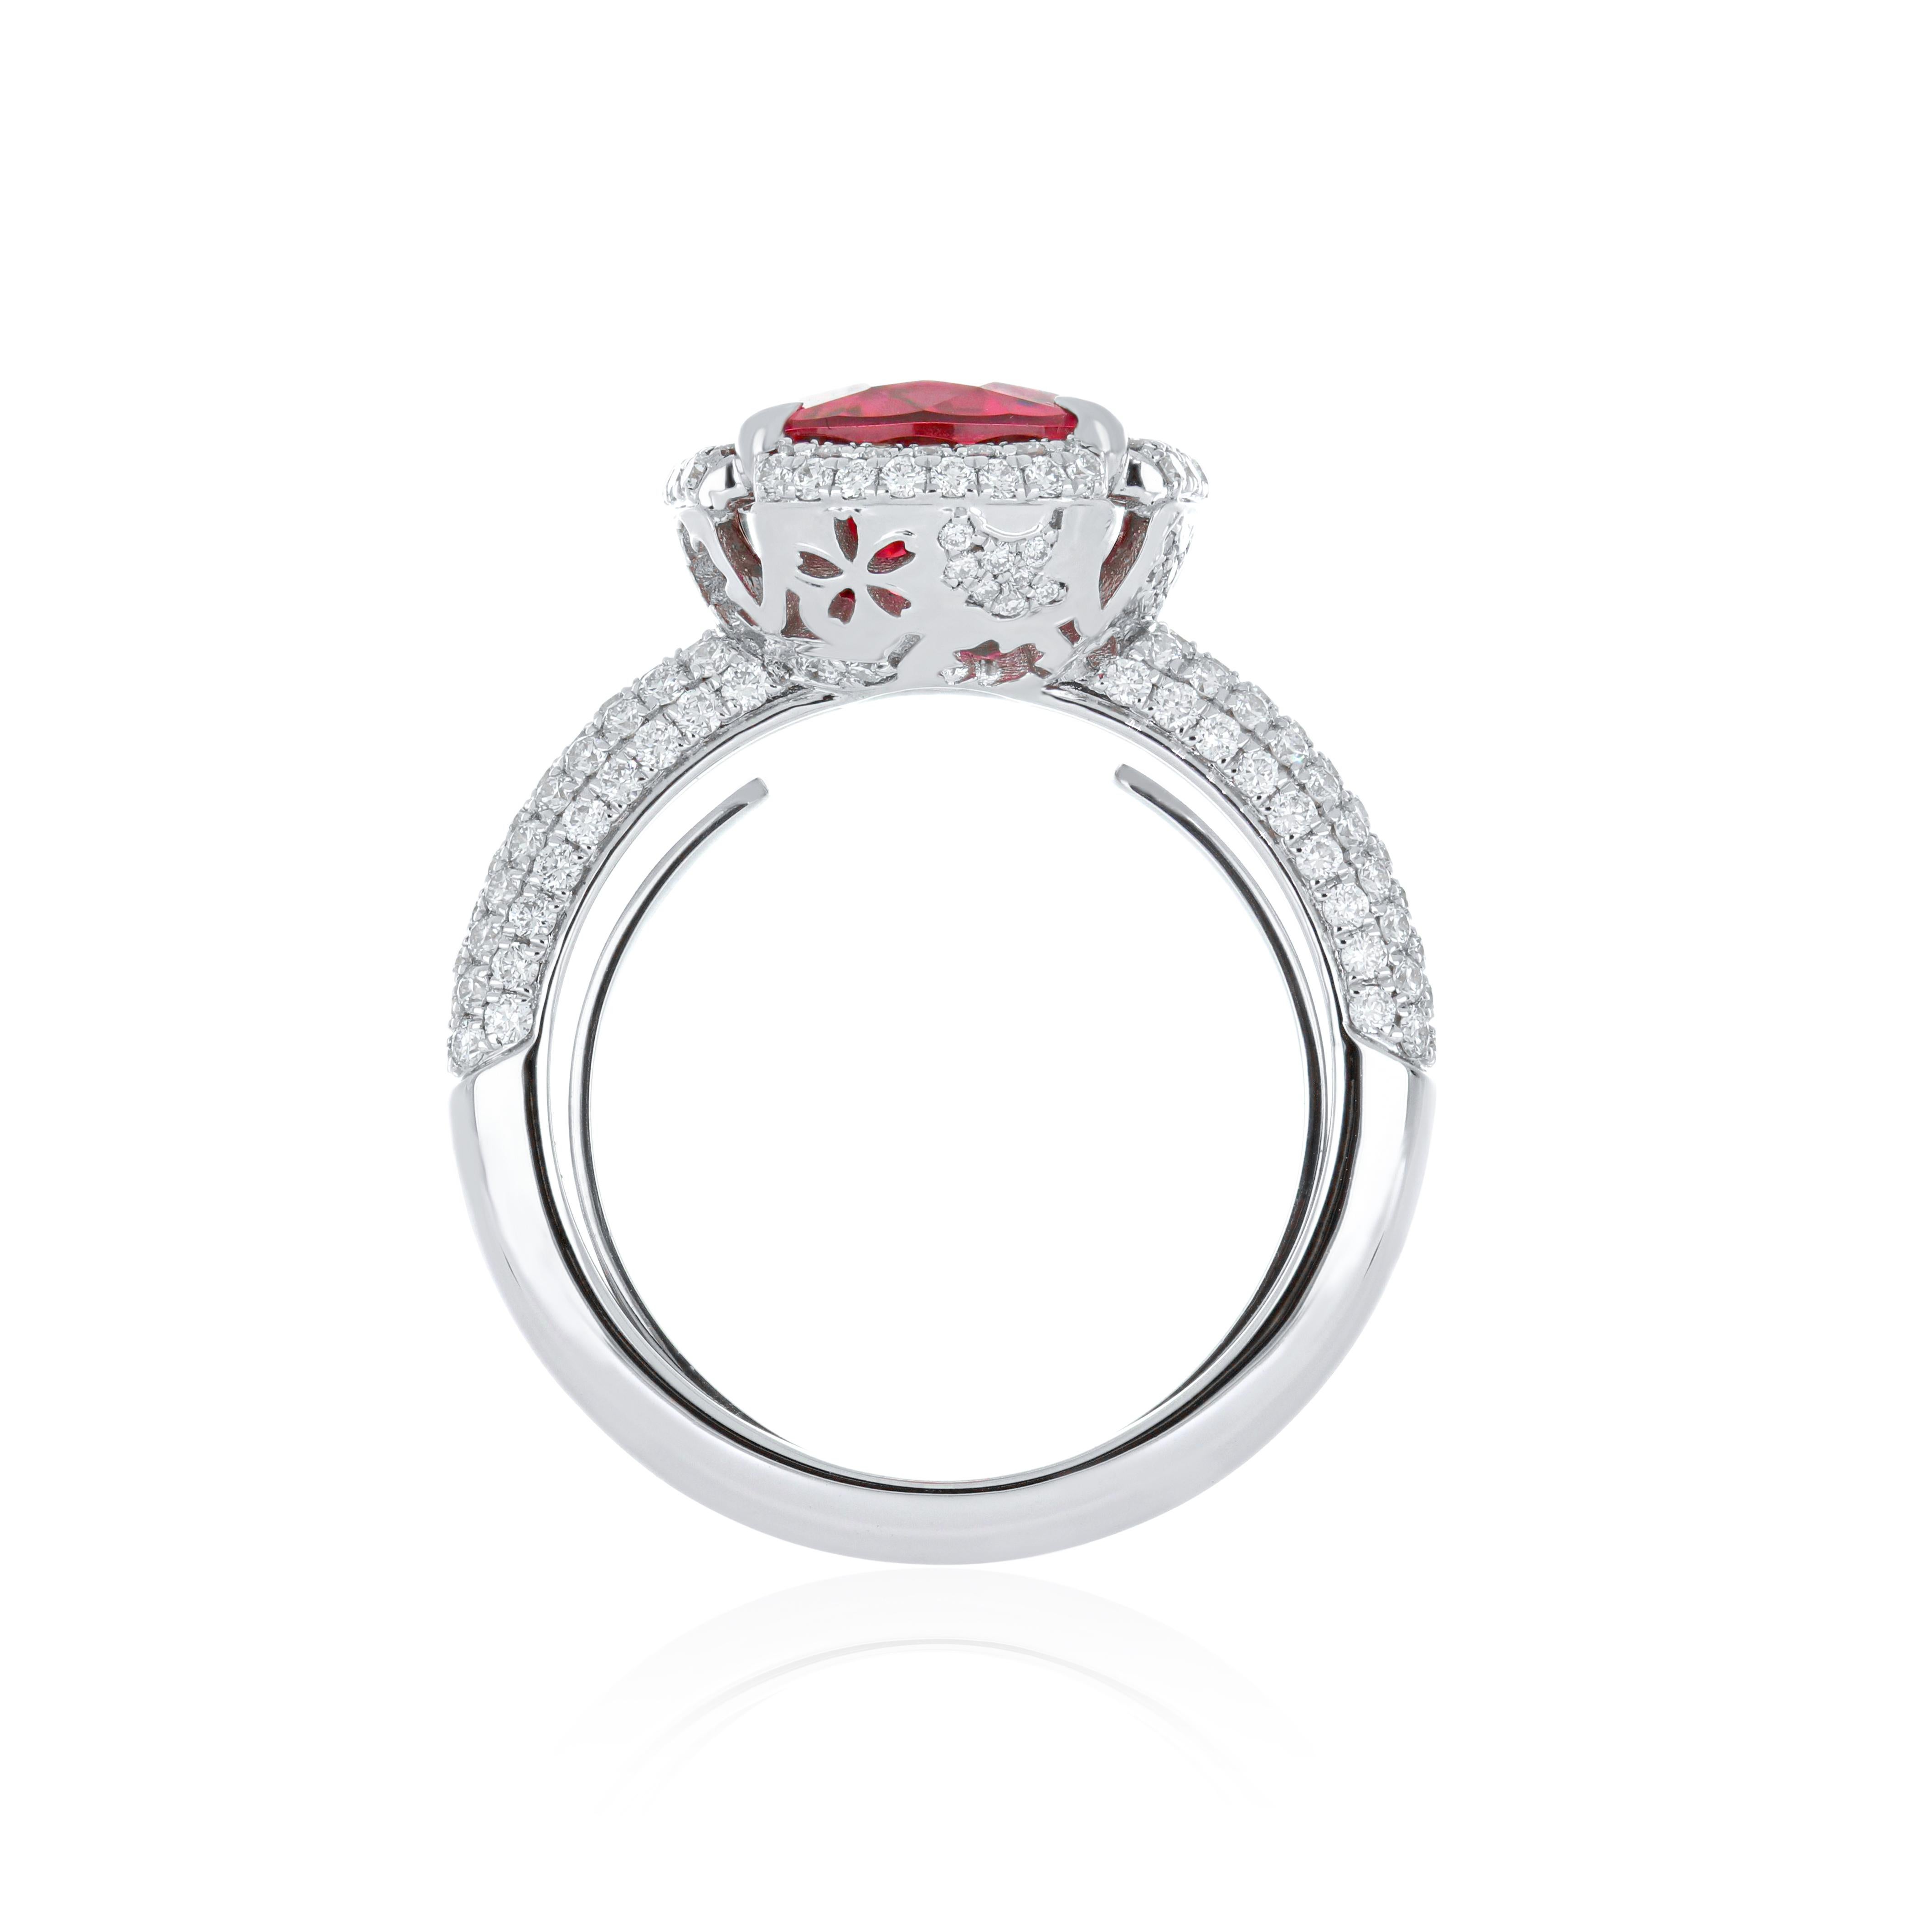 Women's 4.3 Carat Rubellite and Diamond Studded Ring in 18K White Gold Ring For Sale